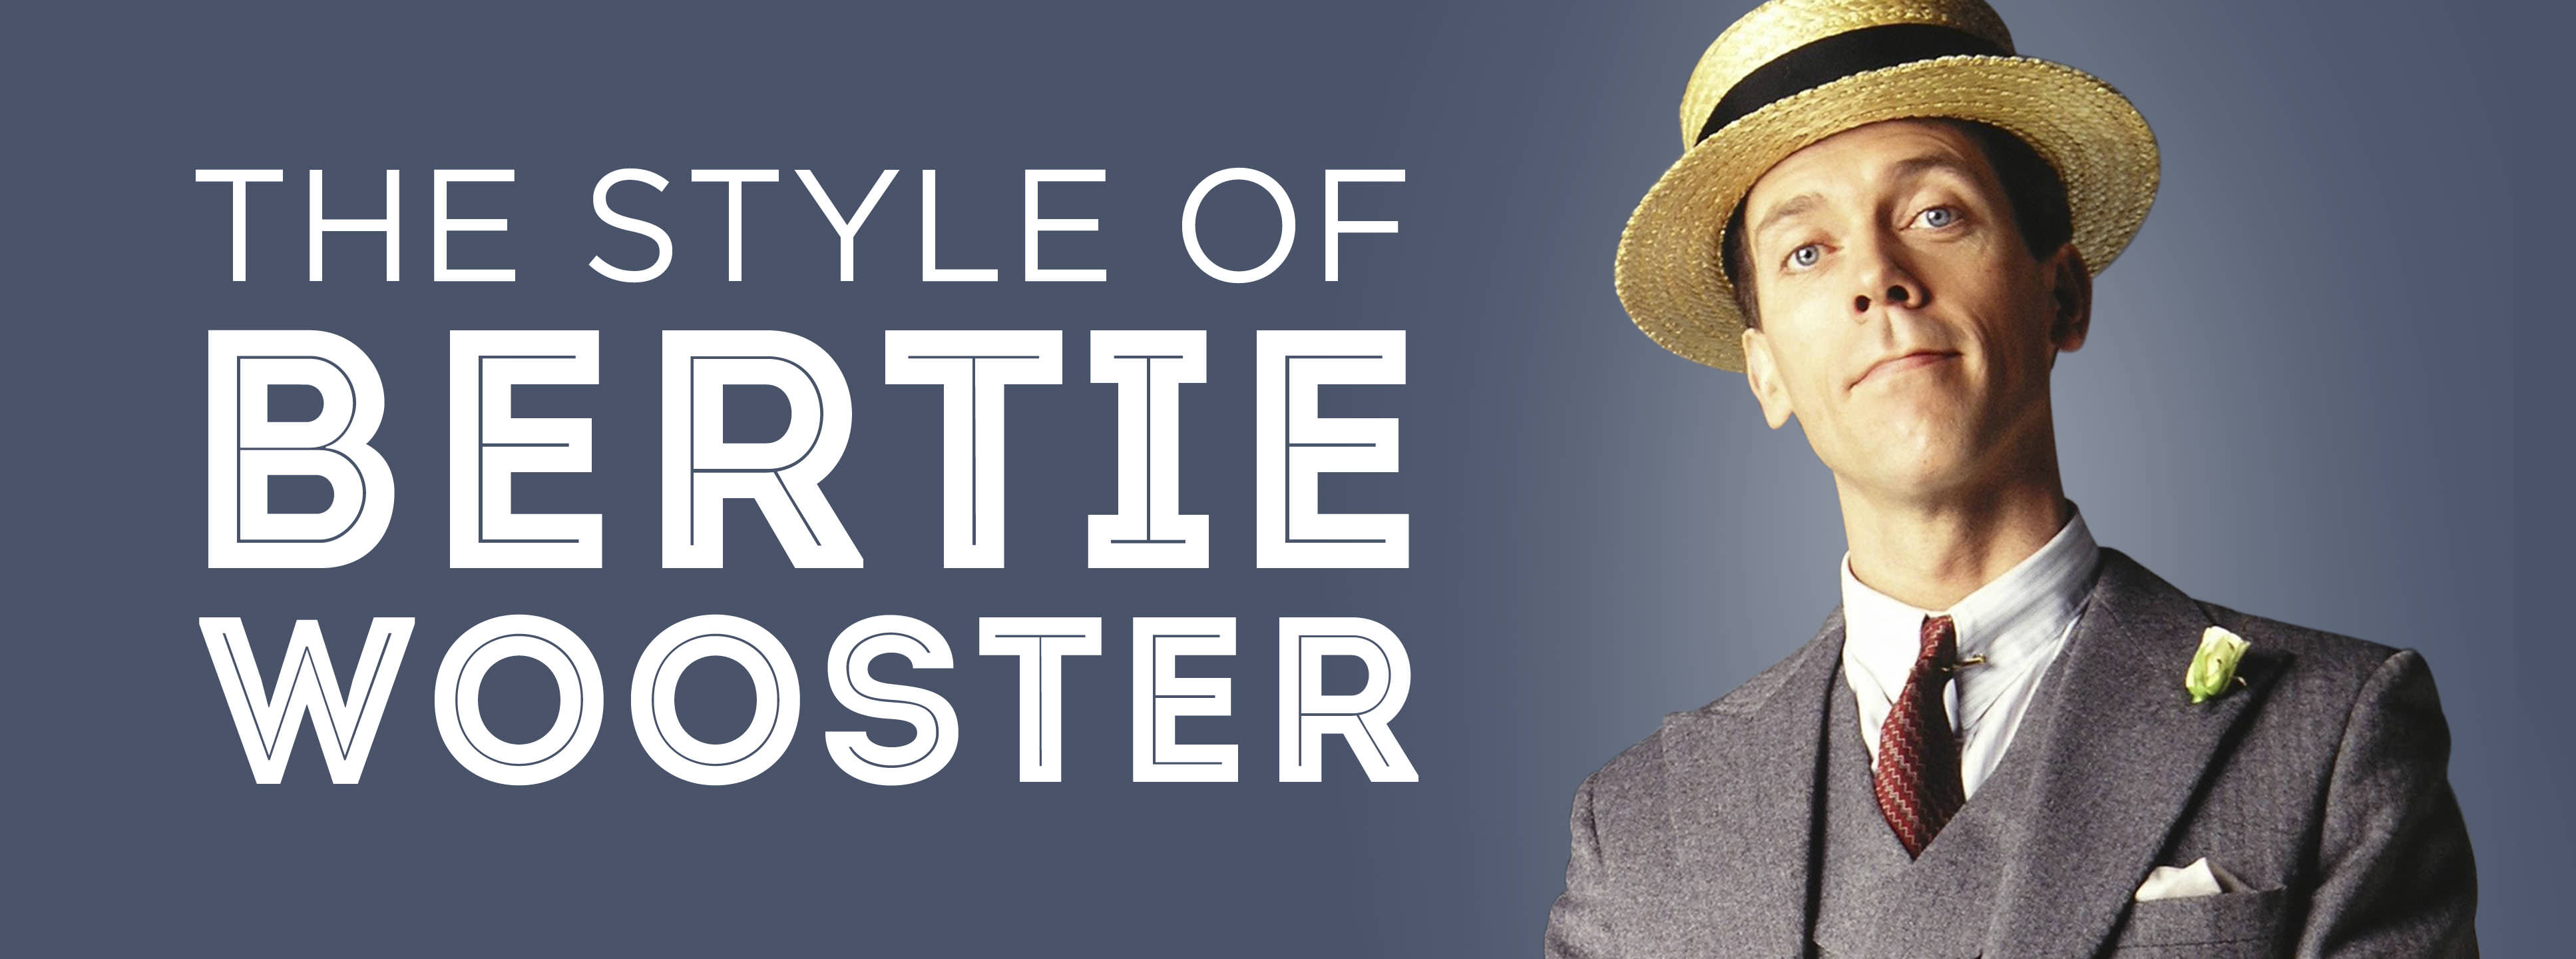 the style of bertie wooster 1